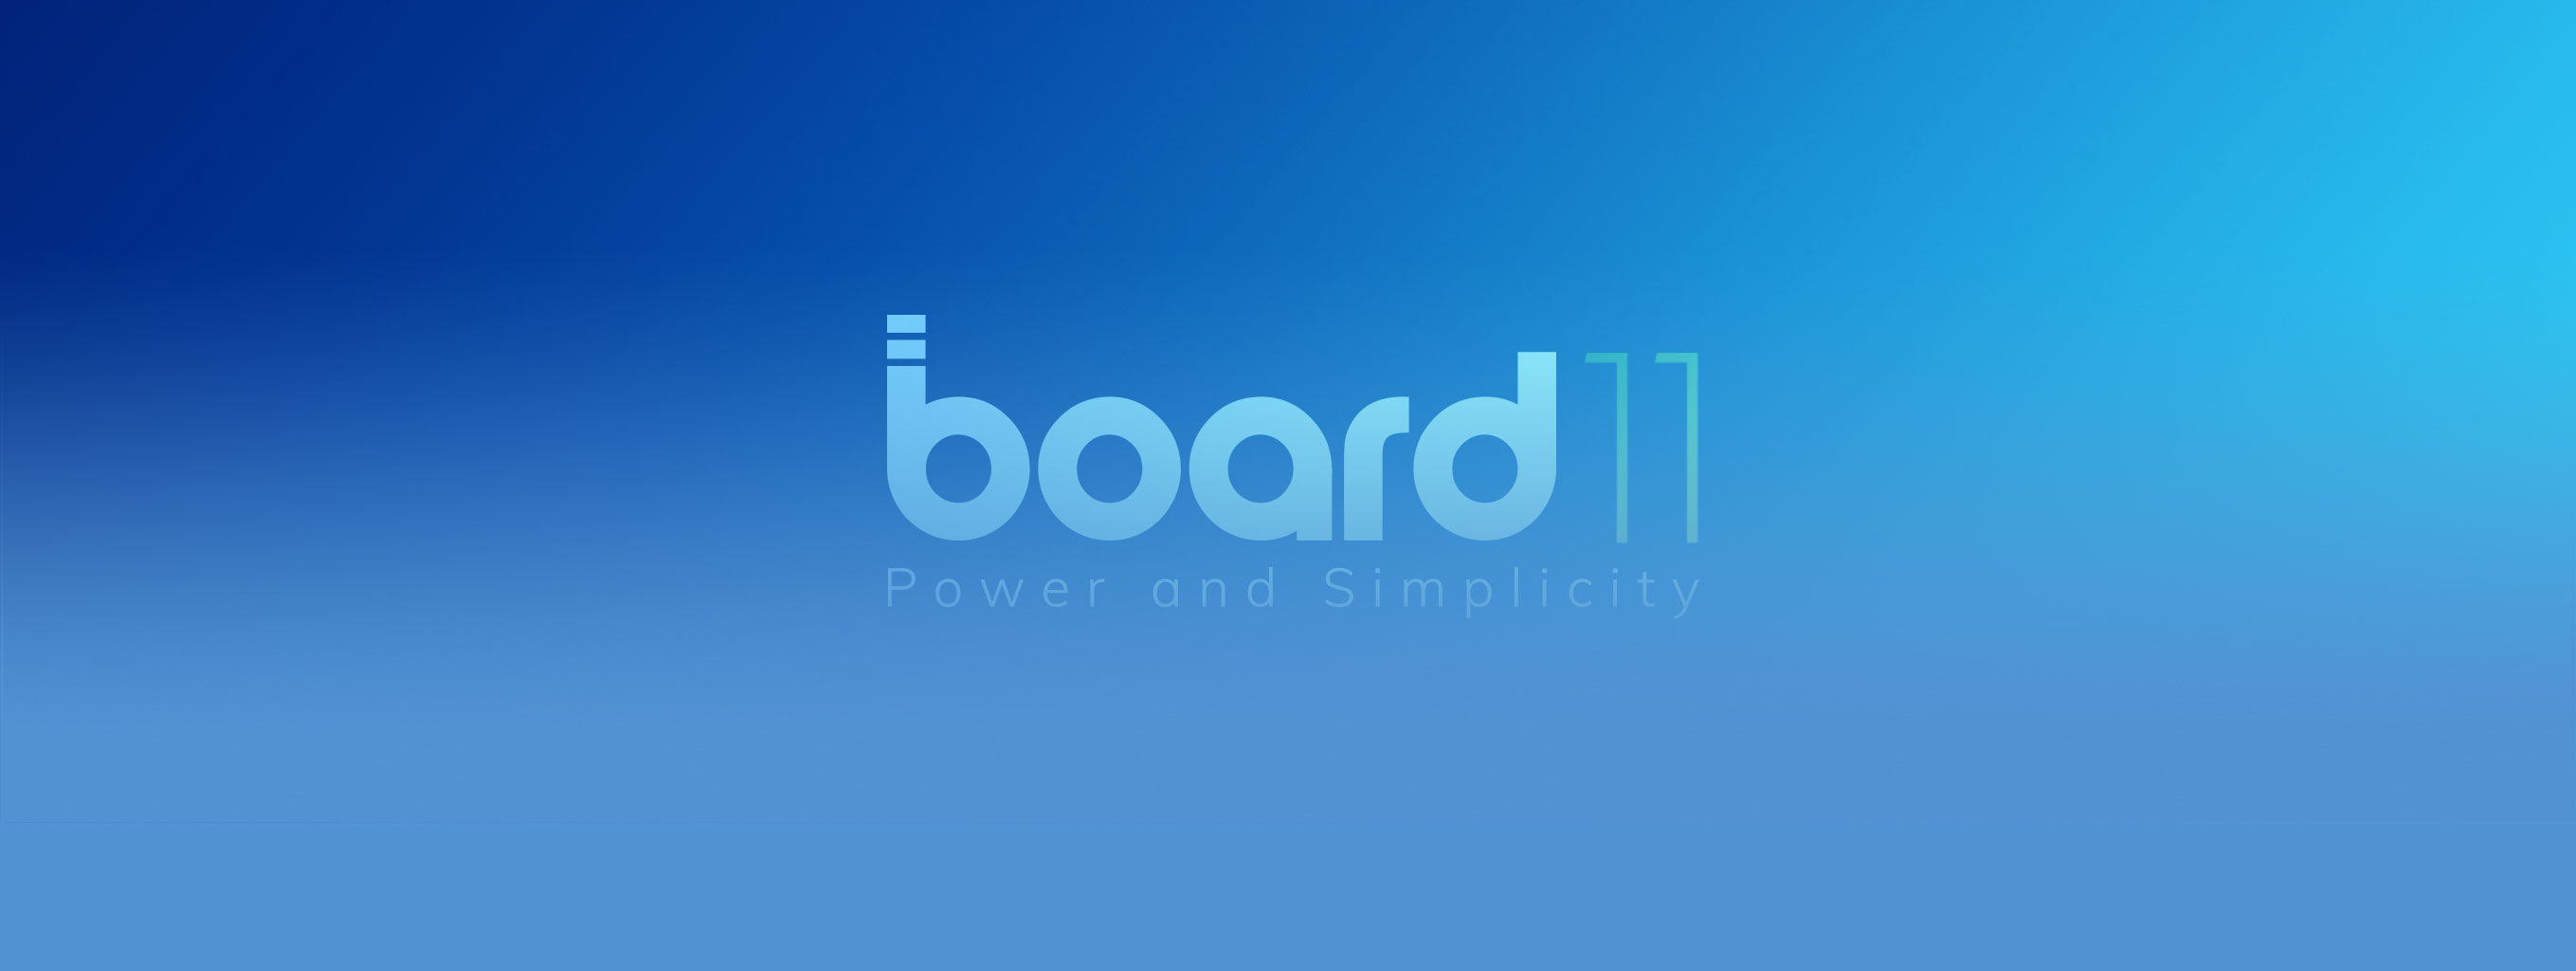 What’s new in the Board 11 Decision-Making Platform?